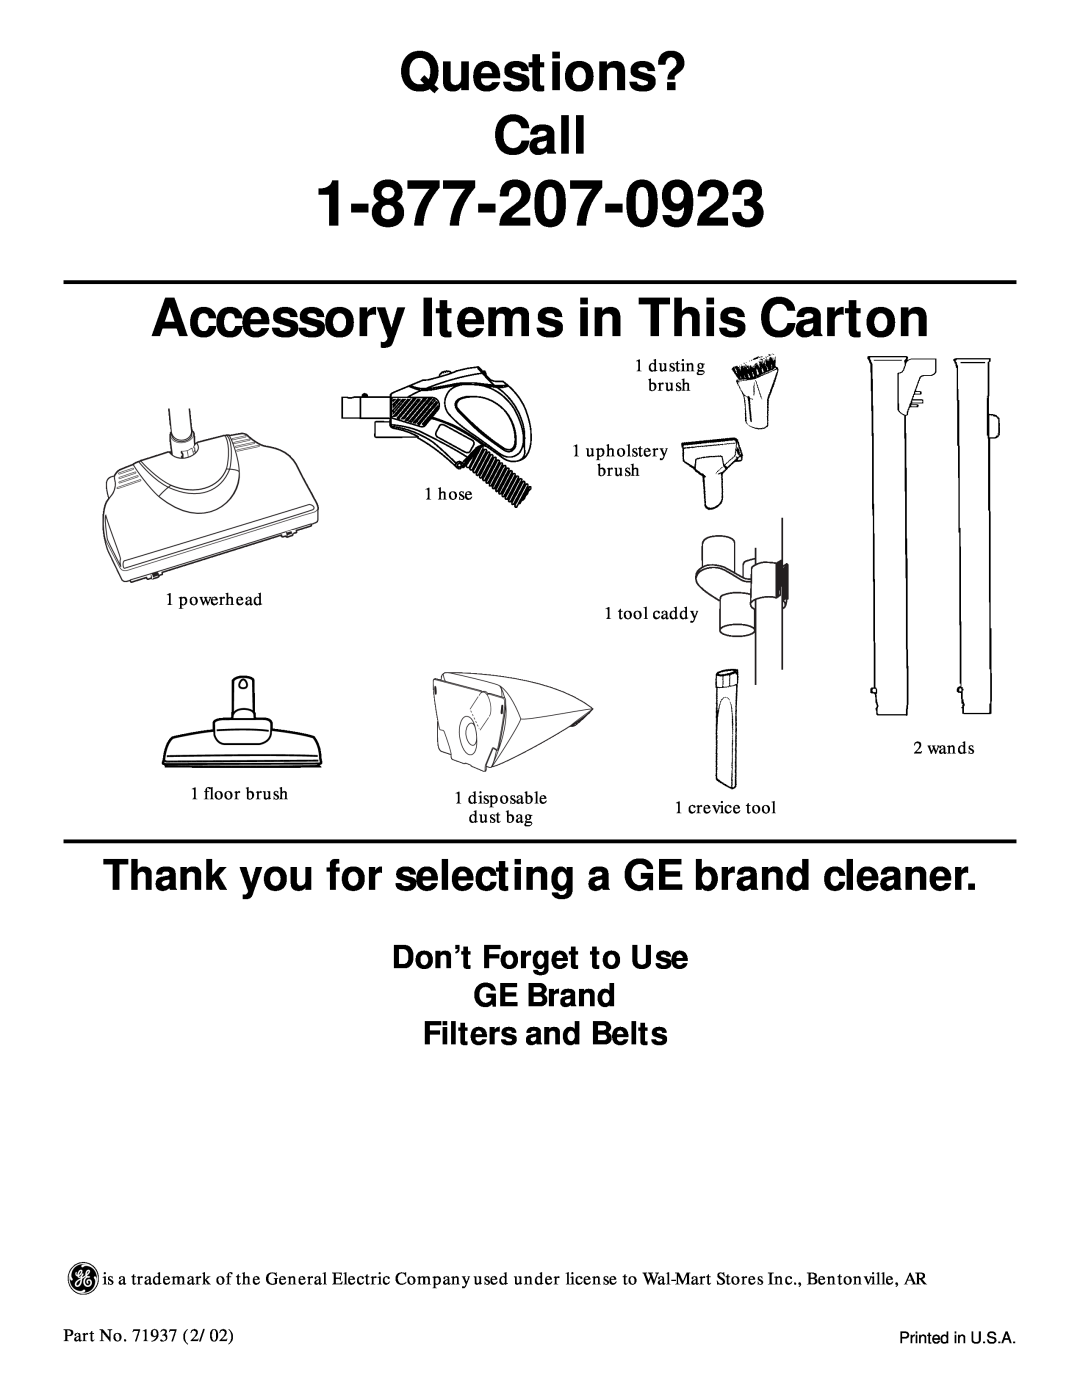 GE 106766, 71937 warranty Don’t Forget to Use GE Brand Filters and Belts, Questions? Call, Accessory Items in This Carton 